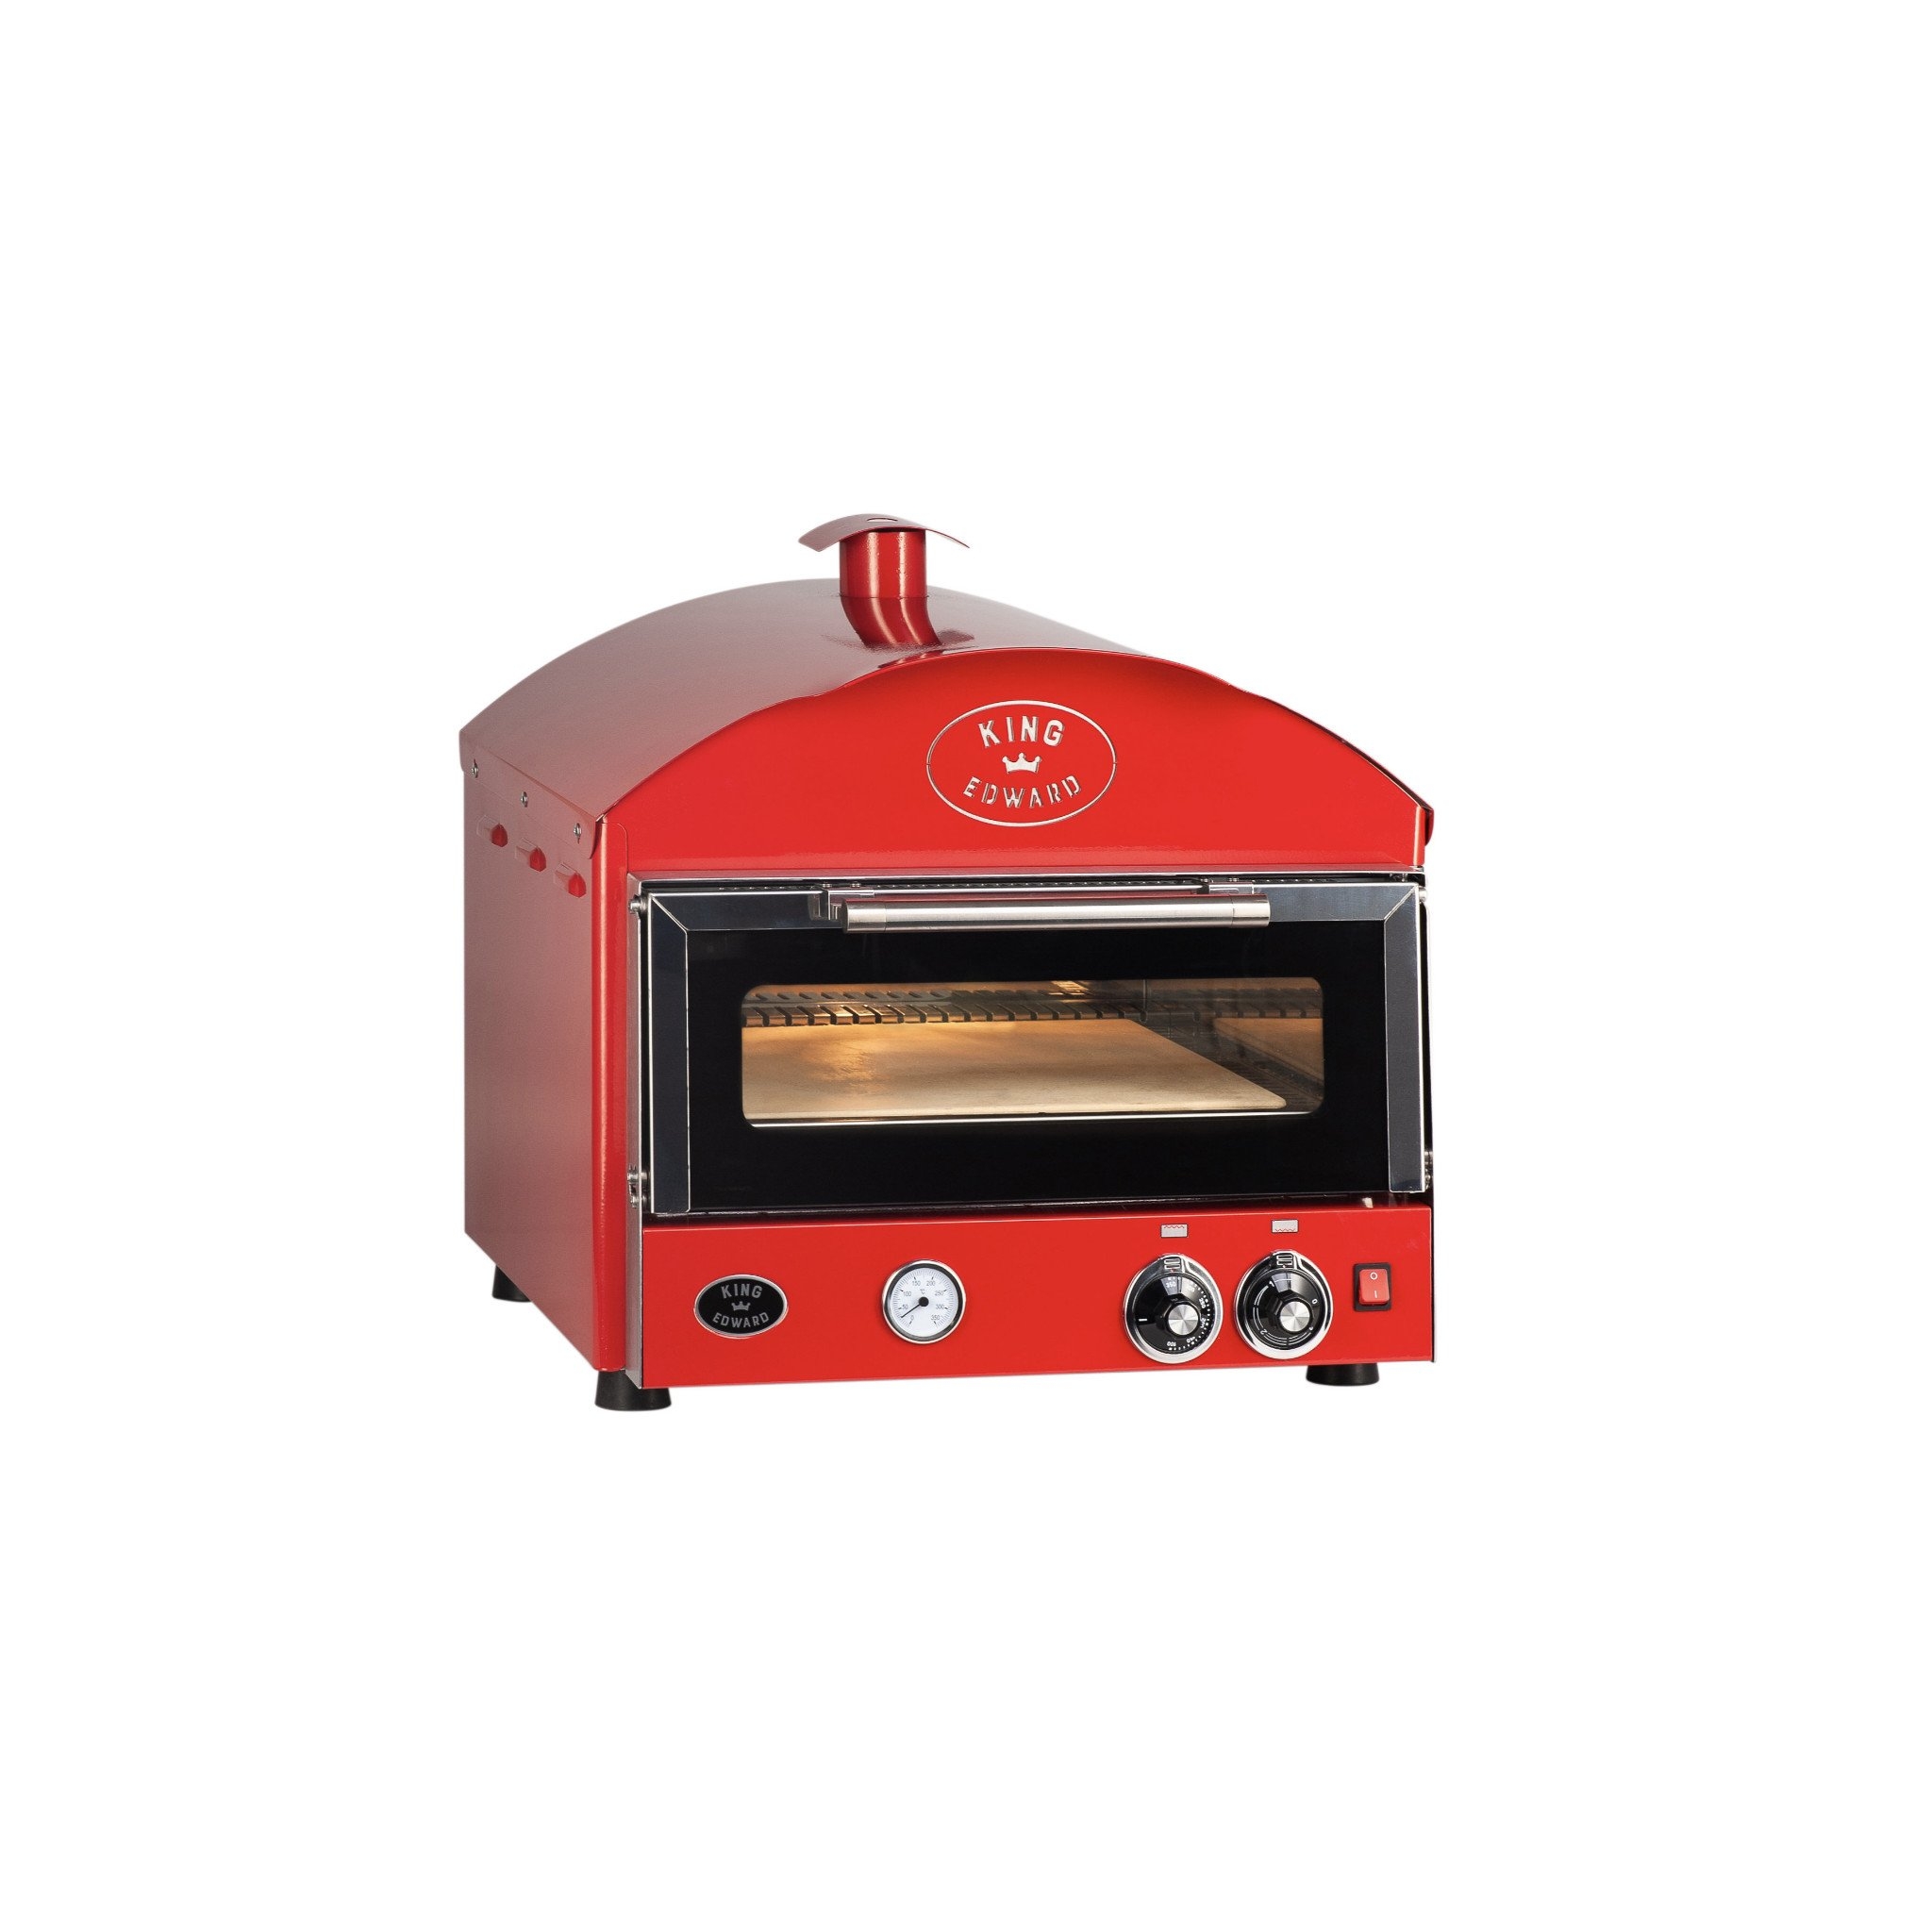 King Edward Stone-Baked Pizza King Oven – Red – Outdoor Pizza Oven – Forno Boutique